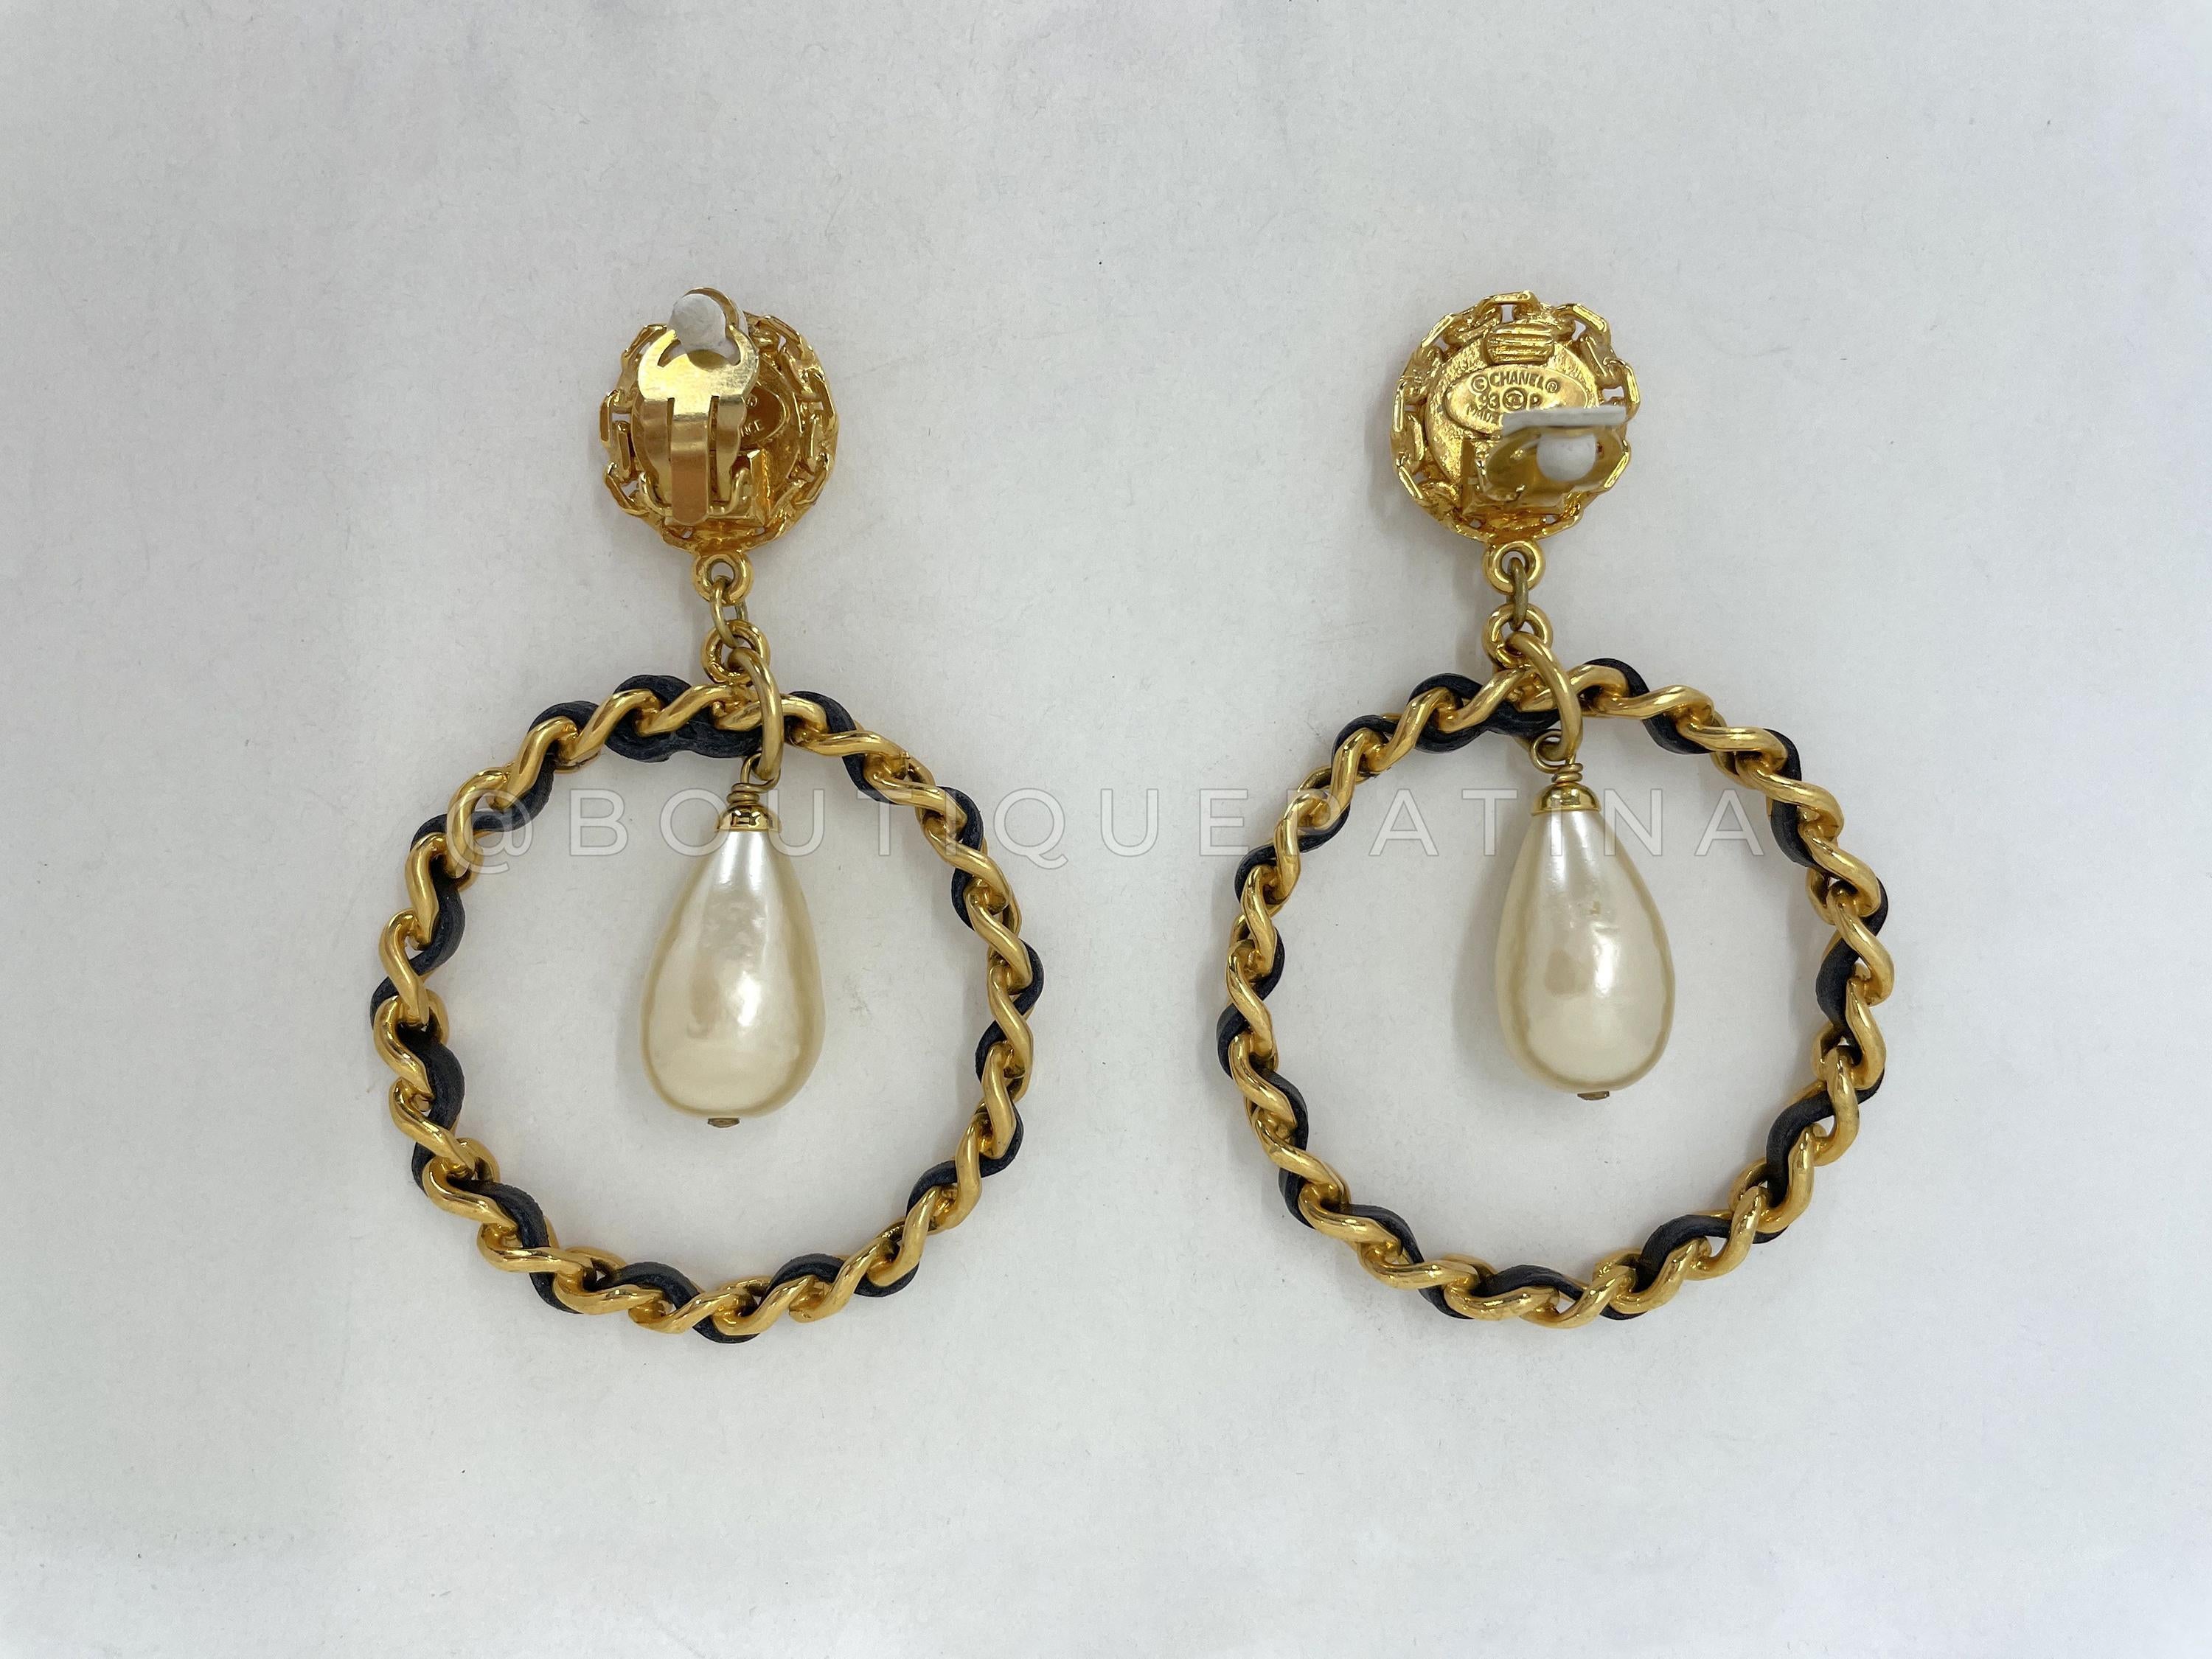 Store item: 65931
Chanel Vintage Woven Chain Collection 27 Pearl Teardrop Hoop Earrings

Condition: Excellent
For 19 years, Boutique Patina has specialized in sourcing and curating the best condition vintage leather treasures by searching closets